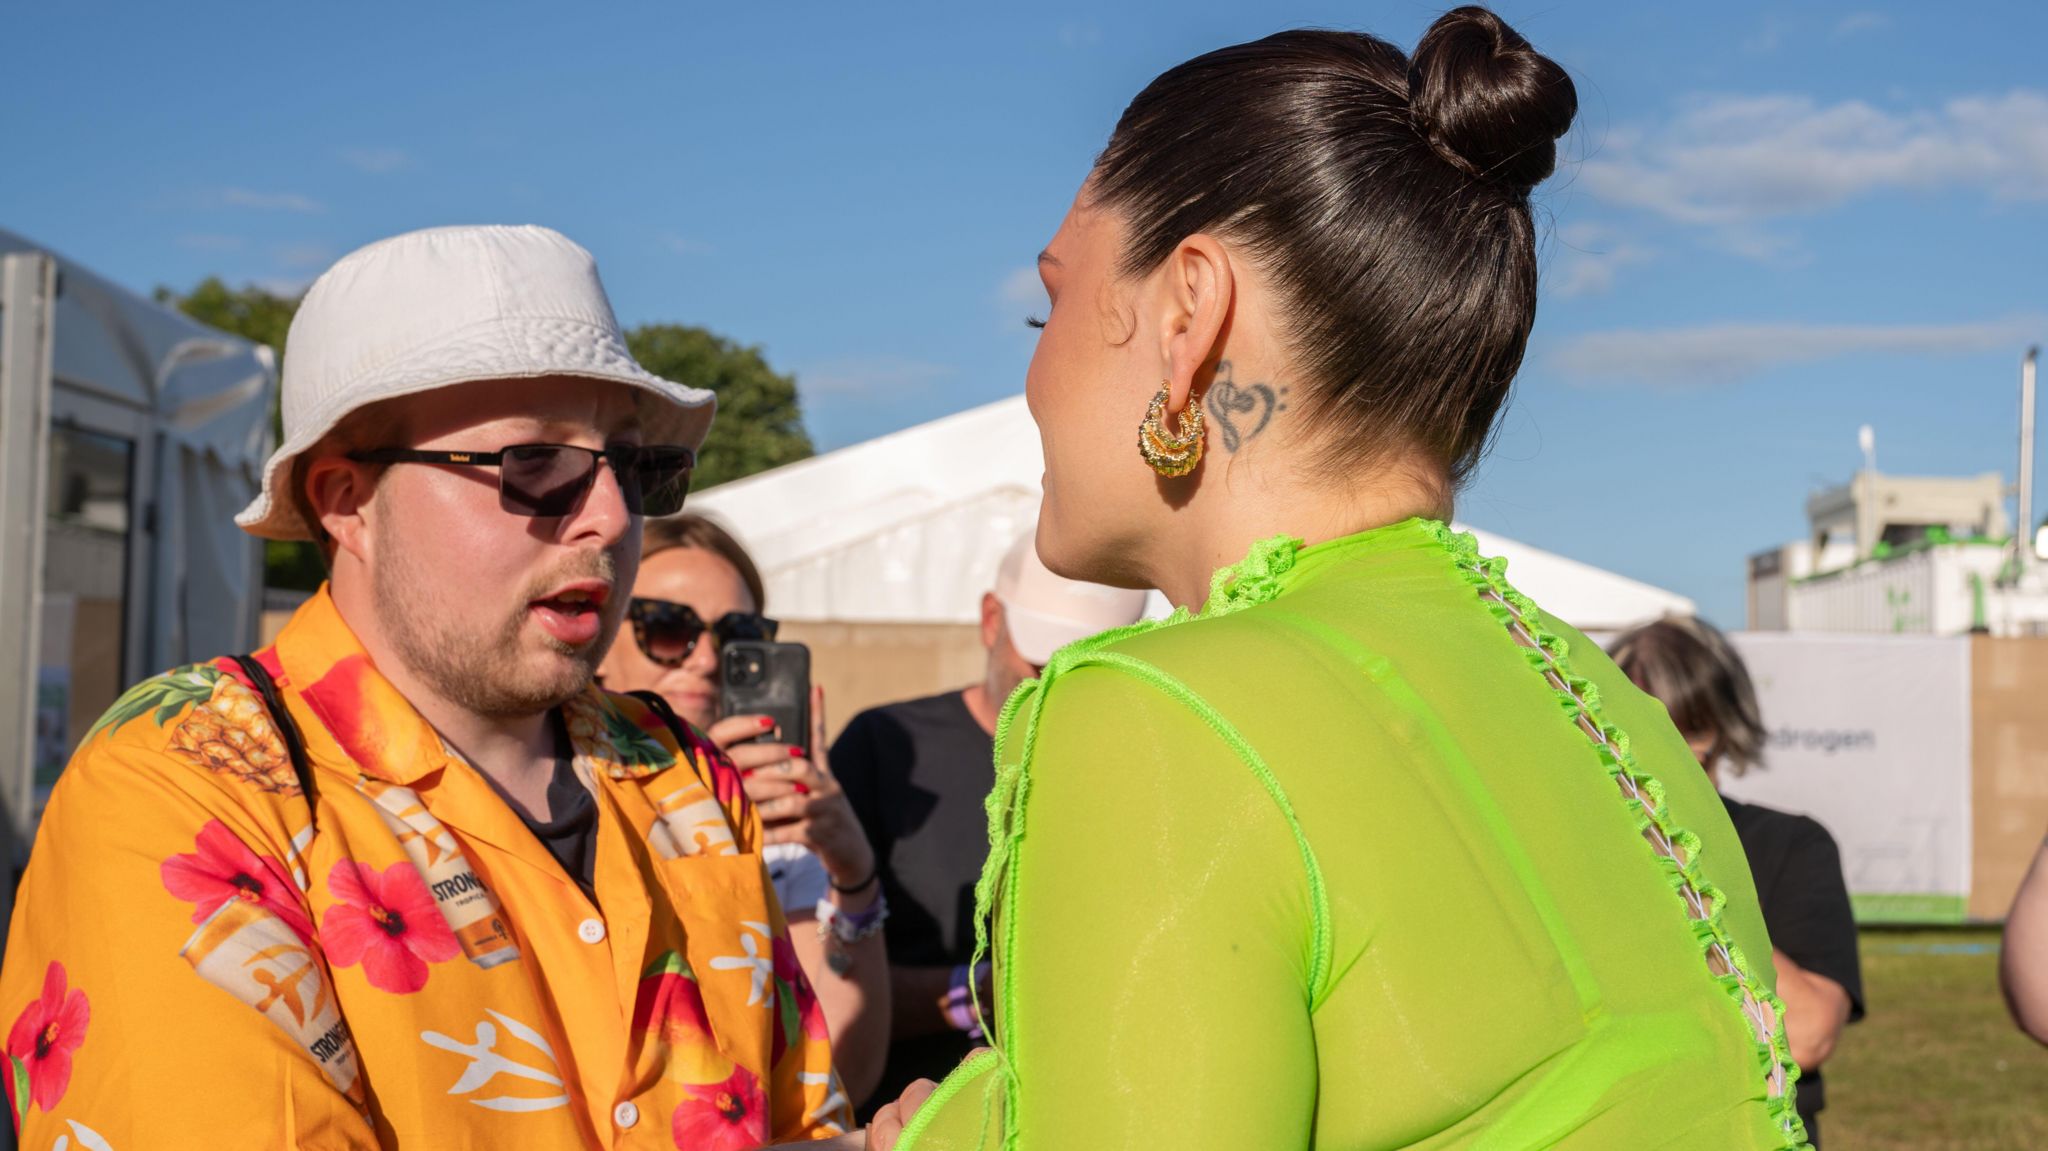 Jessie J in a lime green outfit talking to Nathan who is wearing a orange shirt with pink flowers on. He is also wearing a white bucket hat and crowds of photographers and spectators are around watching the meeting